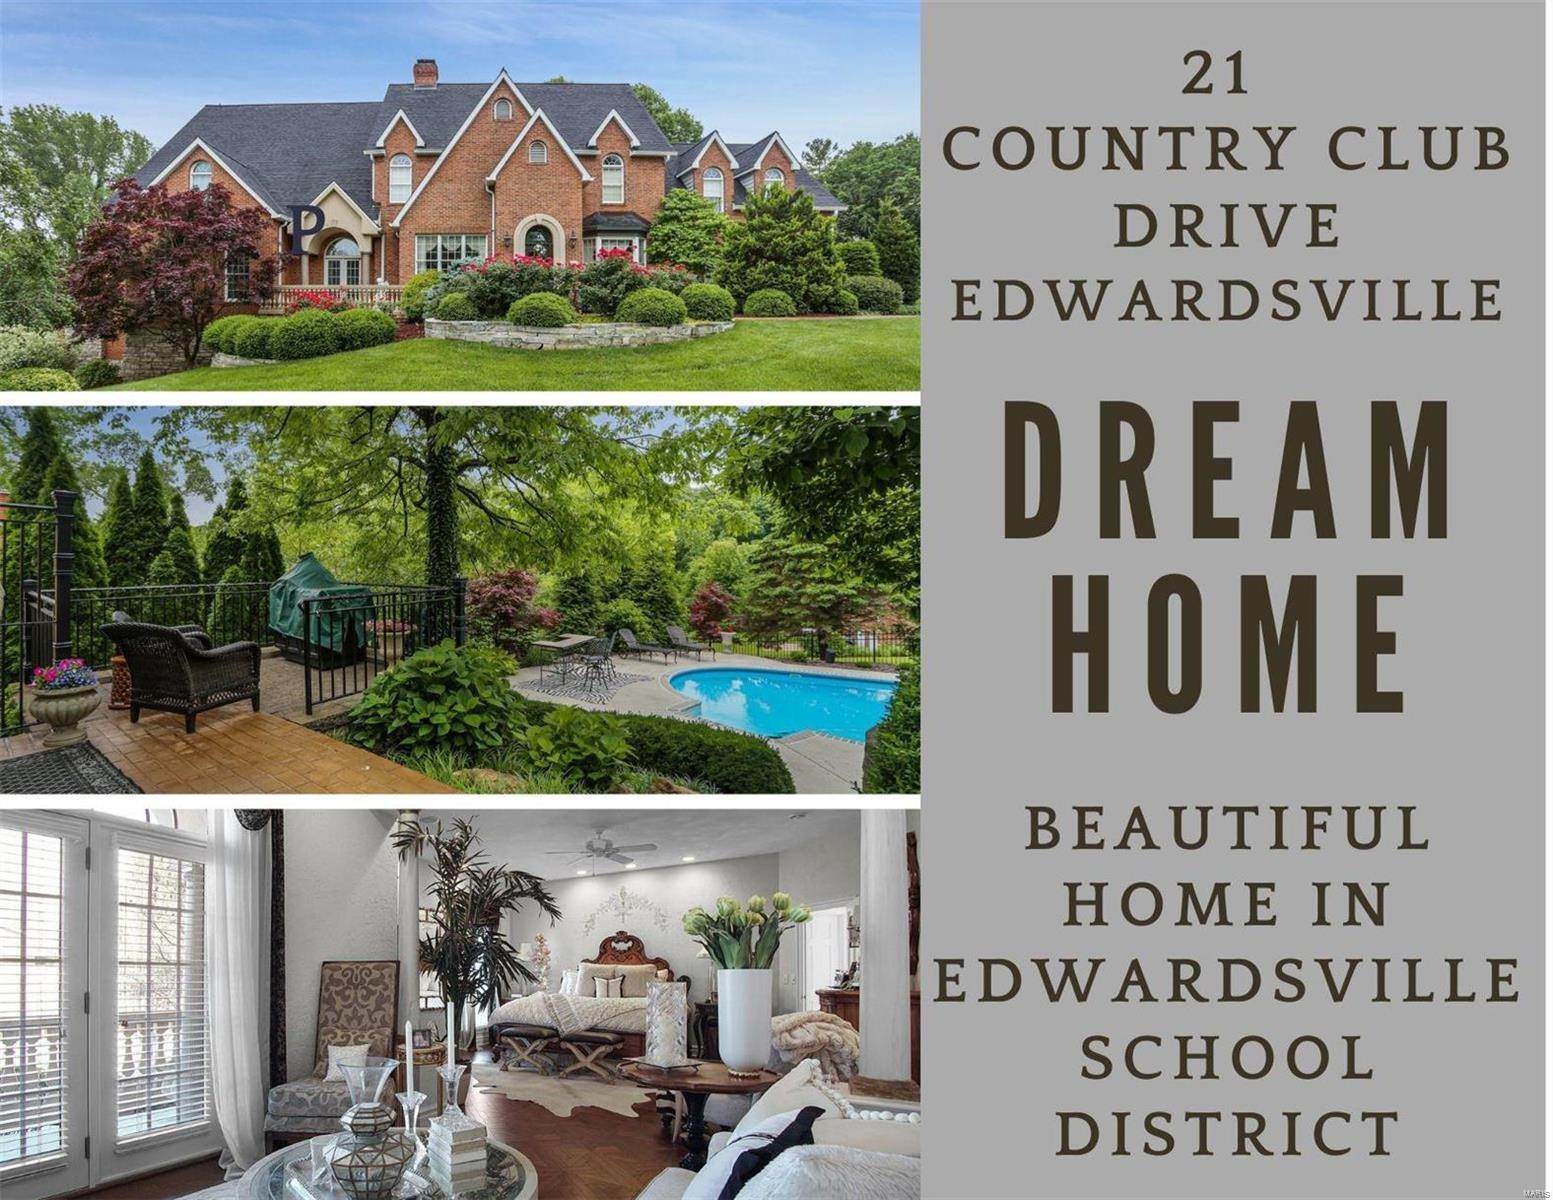 Single Family Homes for Sale at 21 Country Club Drive Edwardsville, Illinois 62025 United States